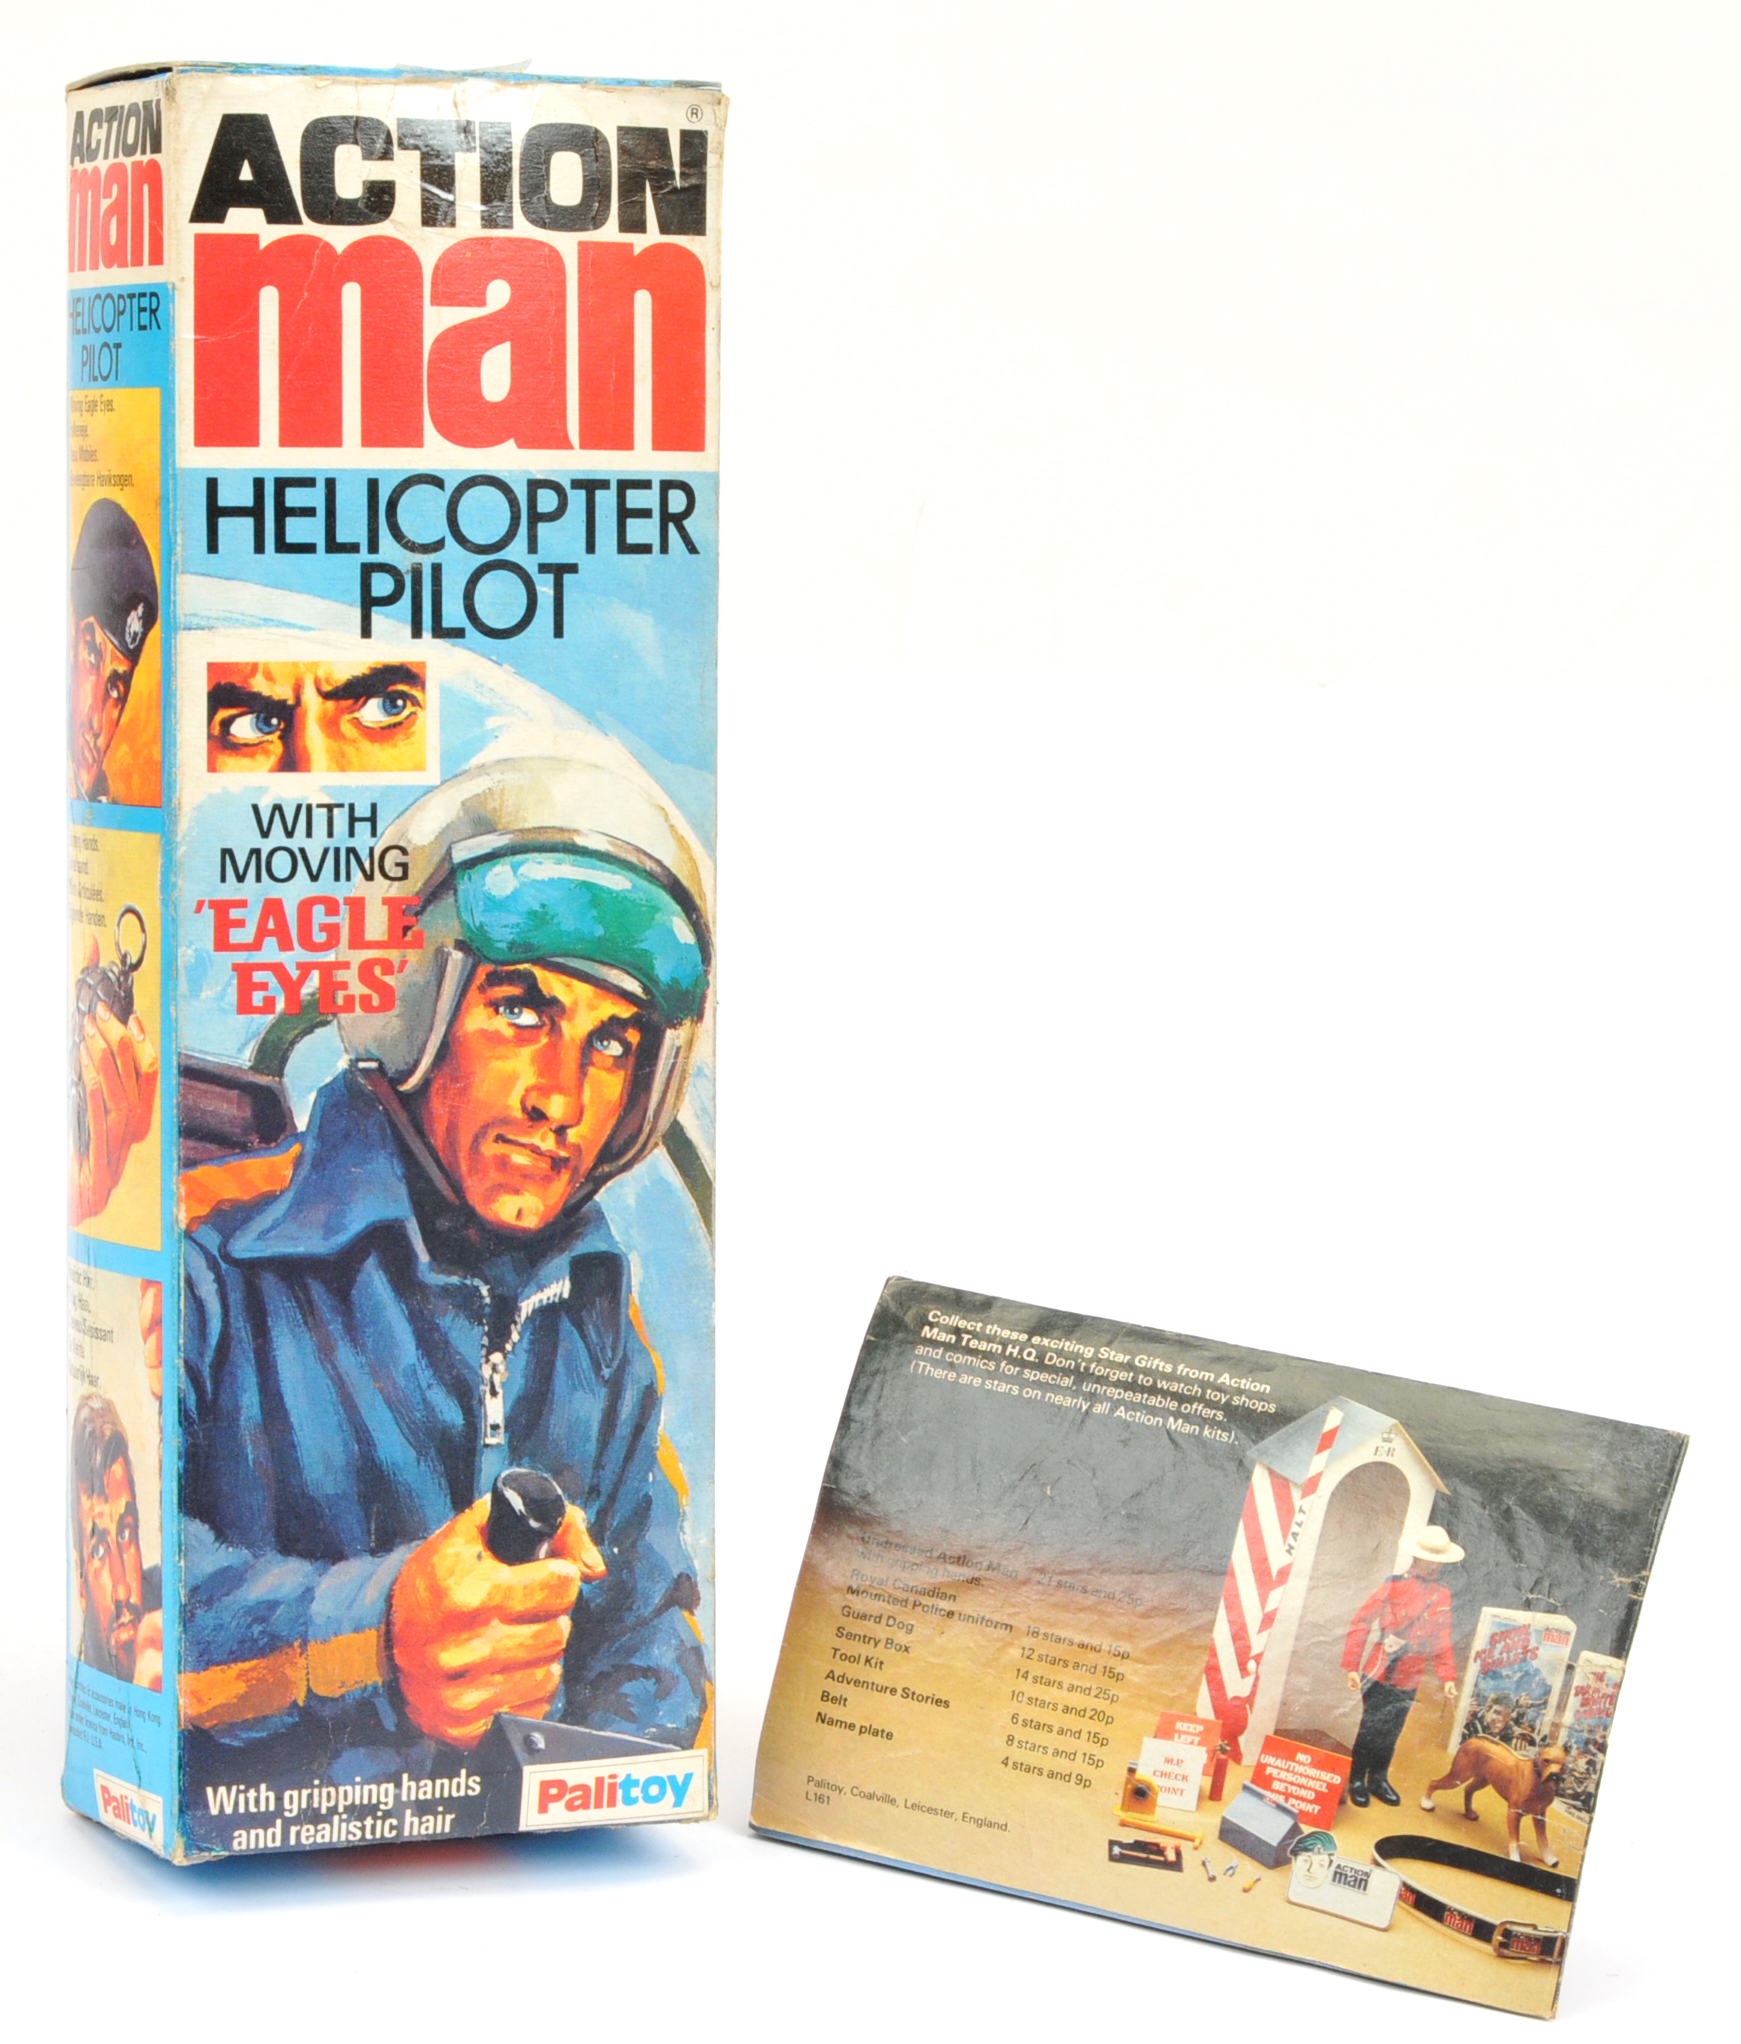 Palitoy Action Man EMPTY Helicopter Pilot box. Condition is Fair Plus. - Image 2 of 2